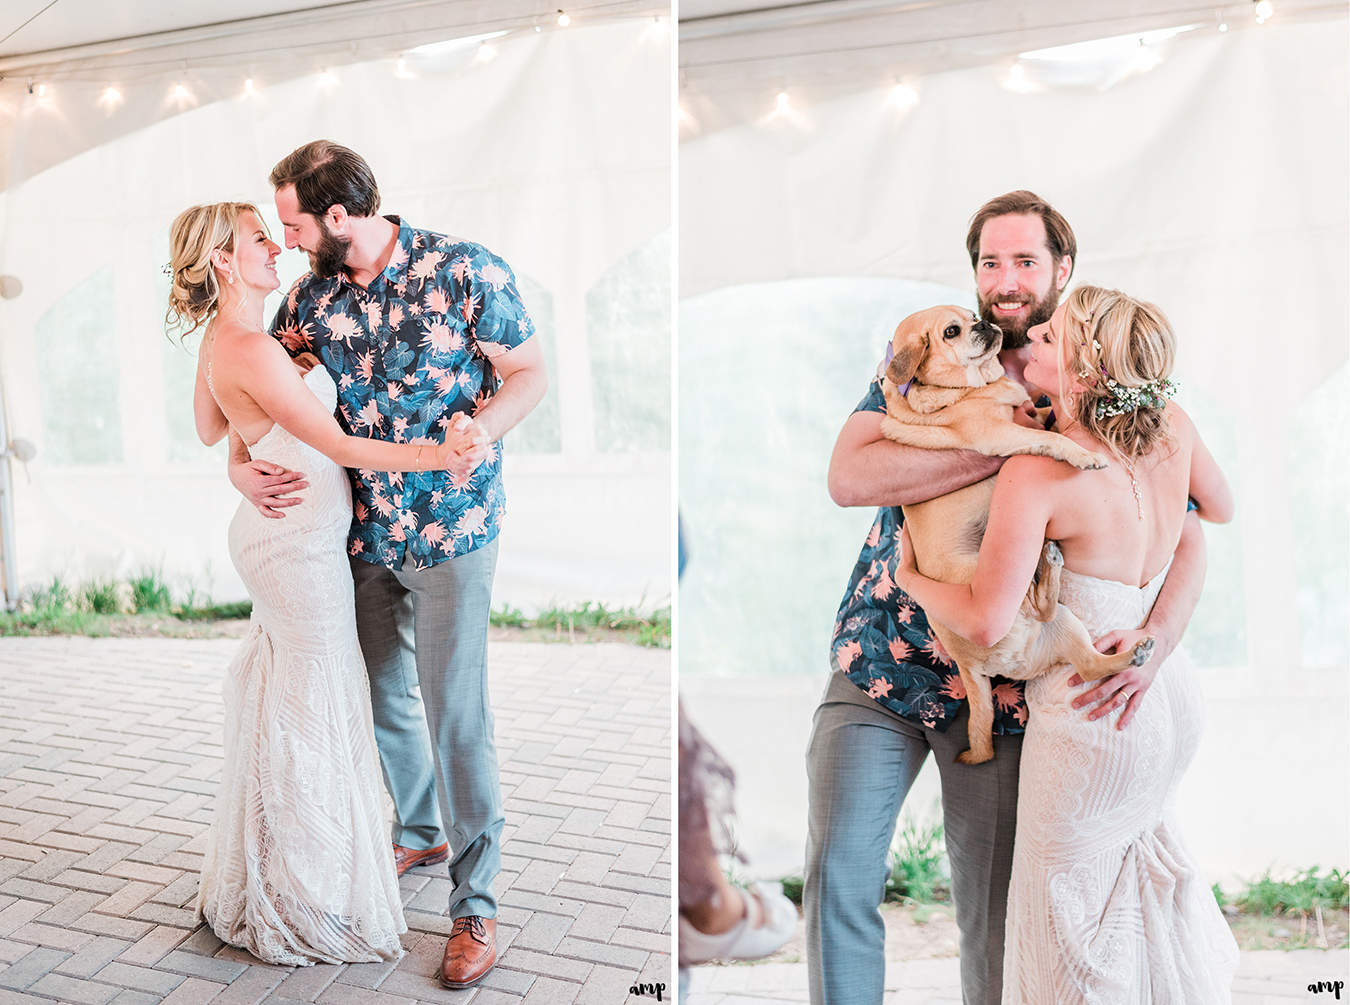 Dan and Courtney's first dance shared with their dog Mr. Bentley in their arms